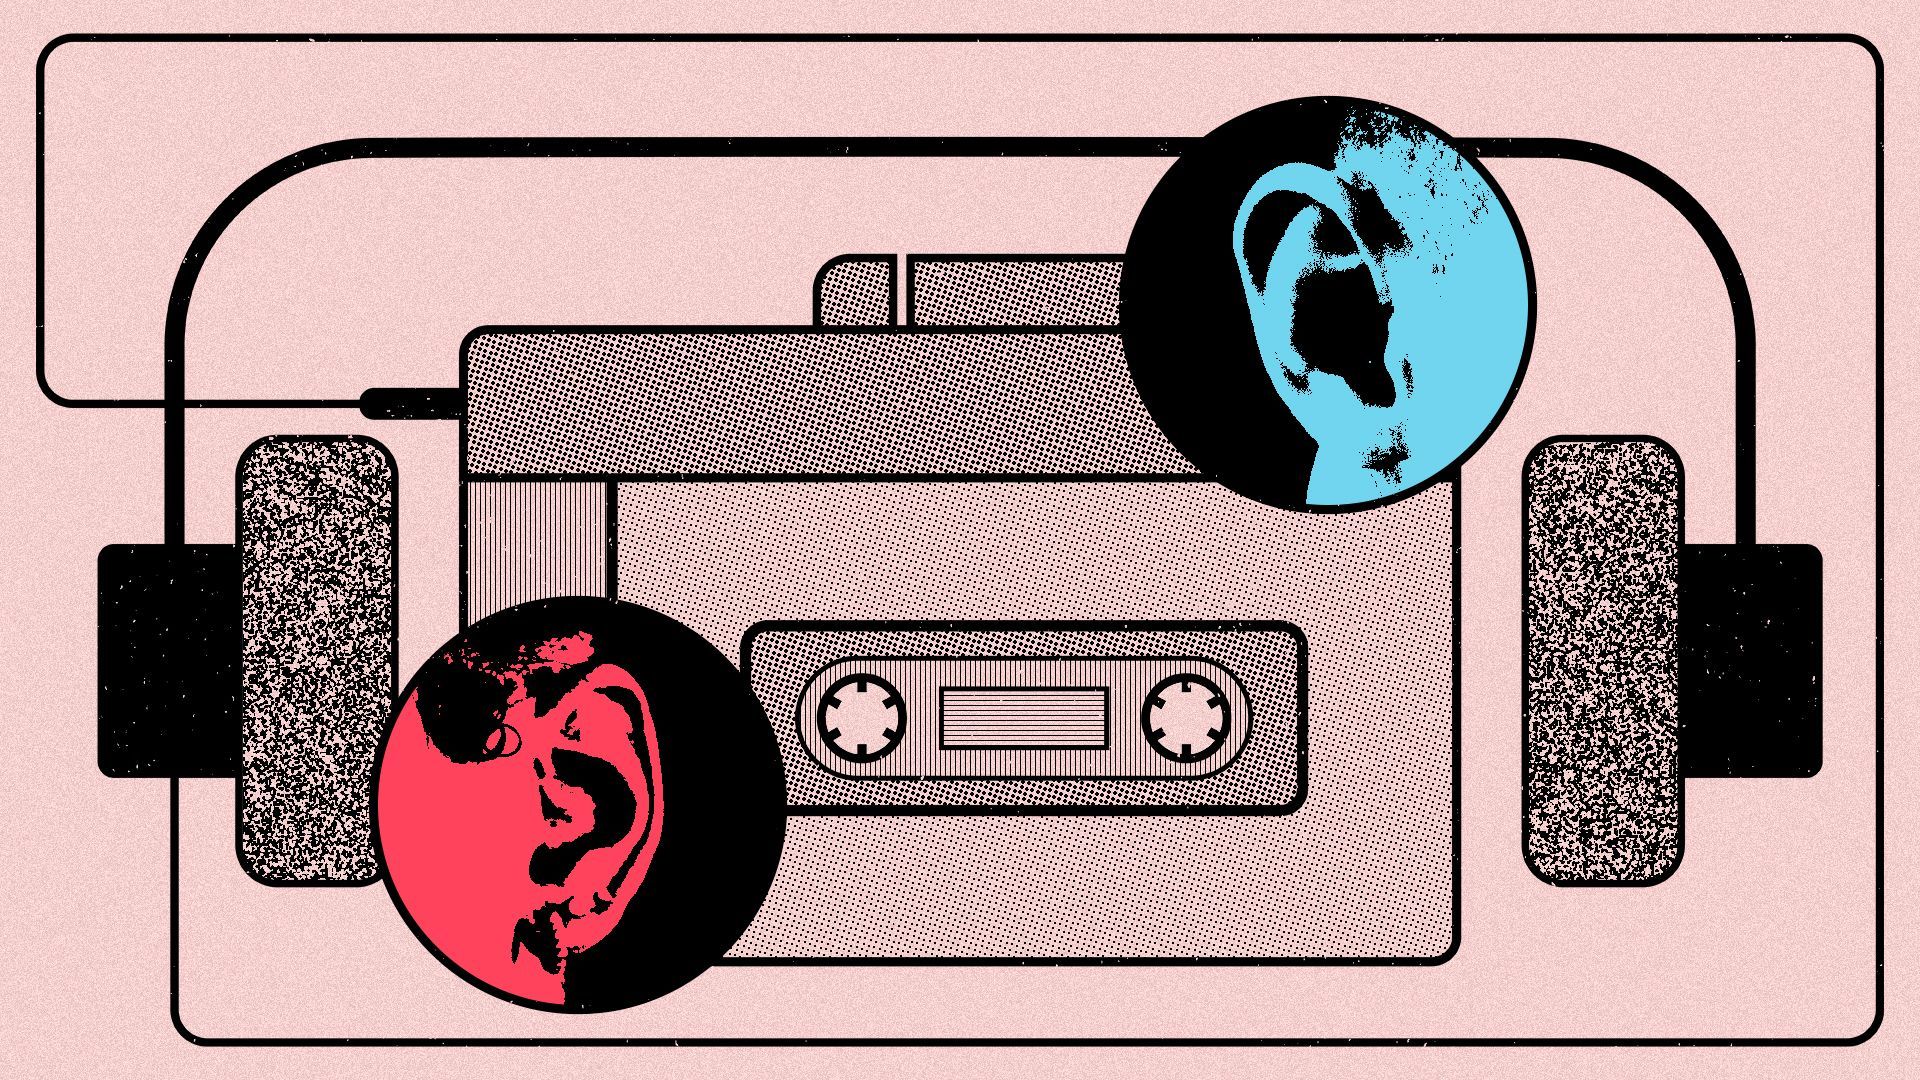 Illustration of a cassette tape player design resembling an early Hip-hop concert flyer with two people's ears over it.